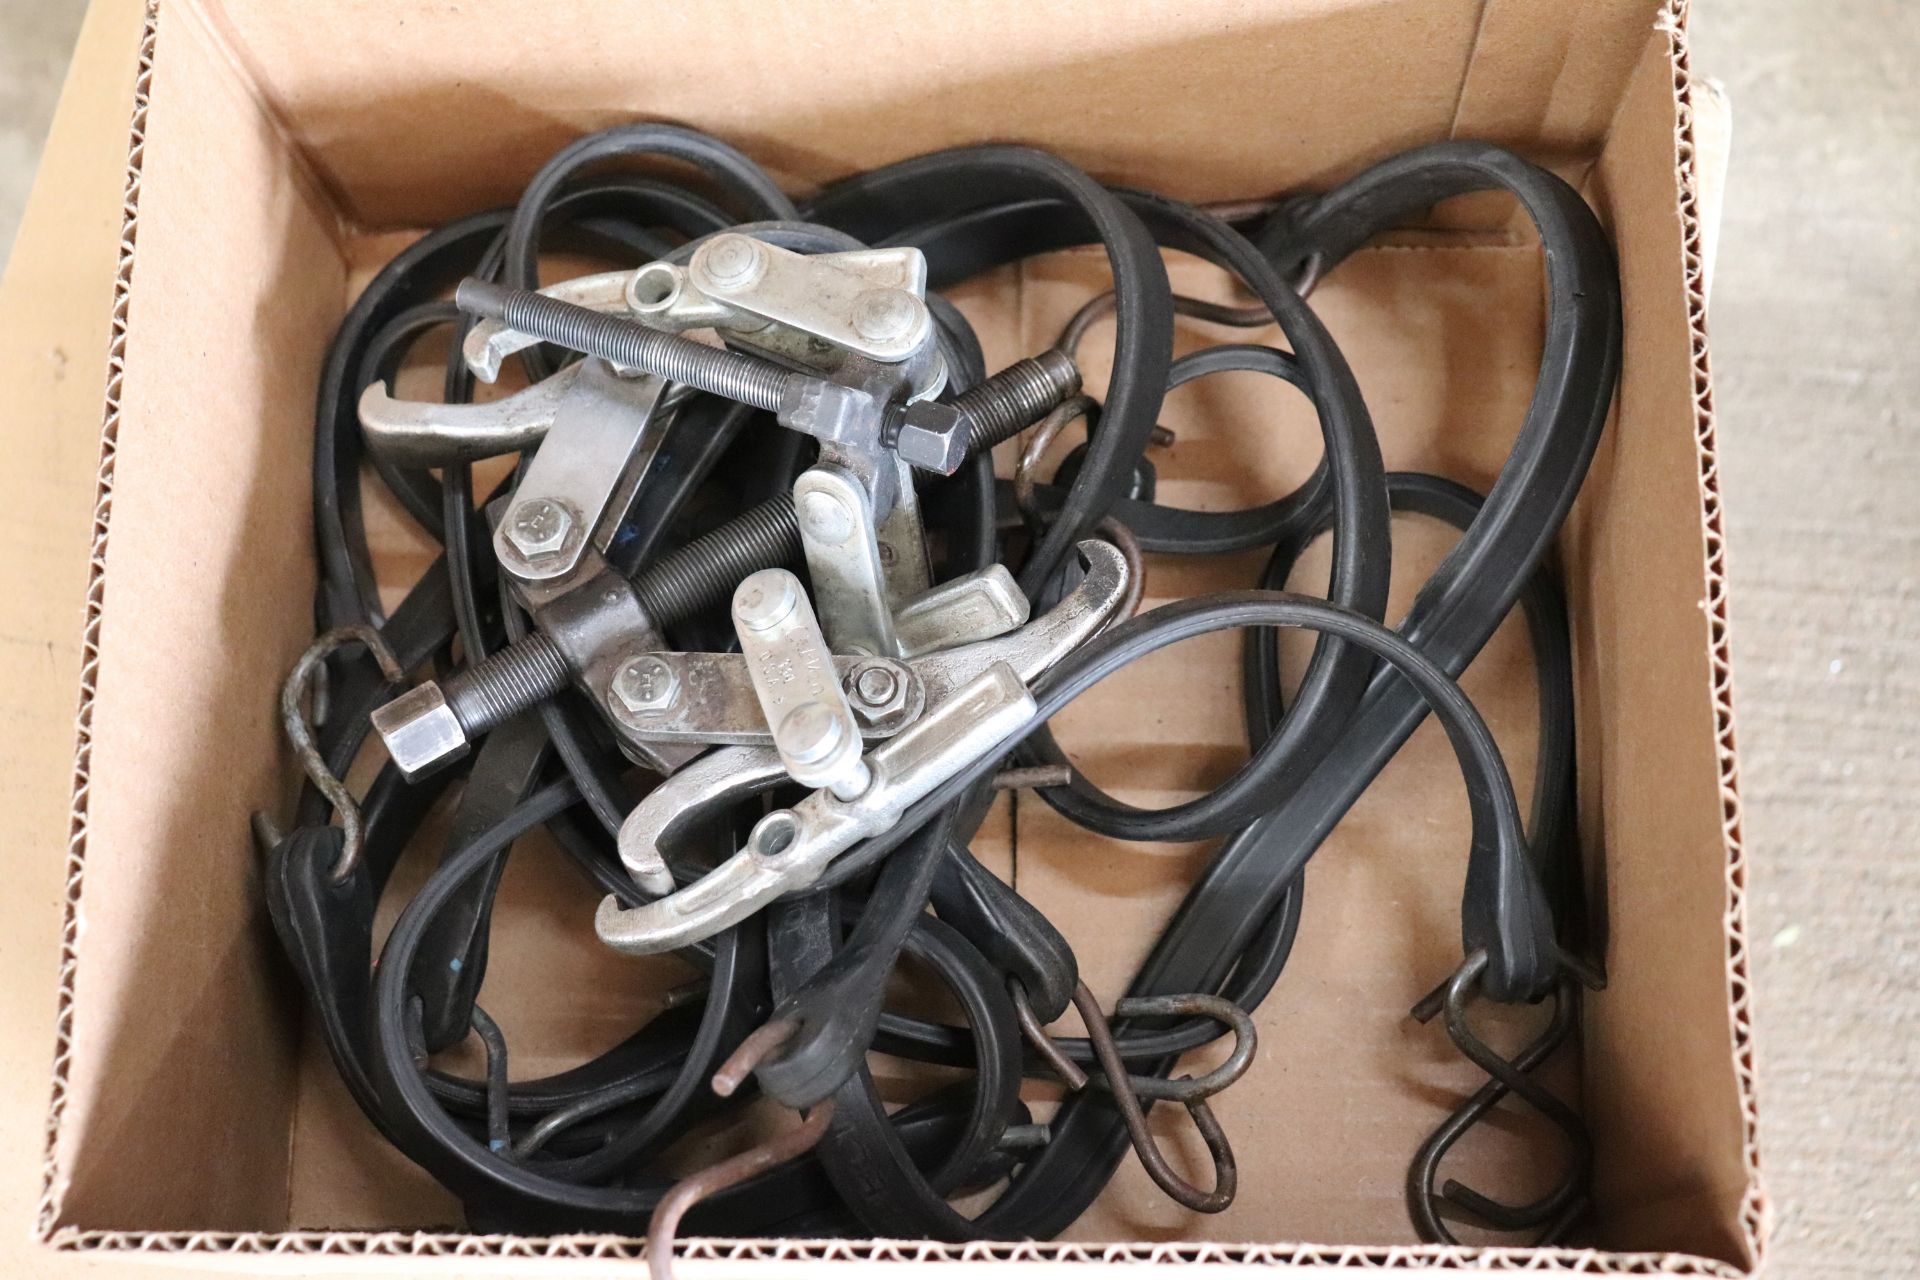 Lot of bungee cords and gear pullers